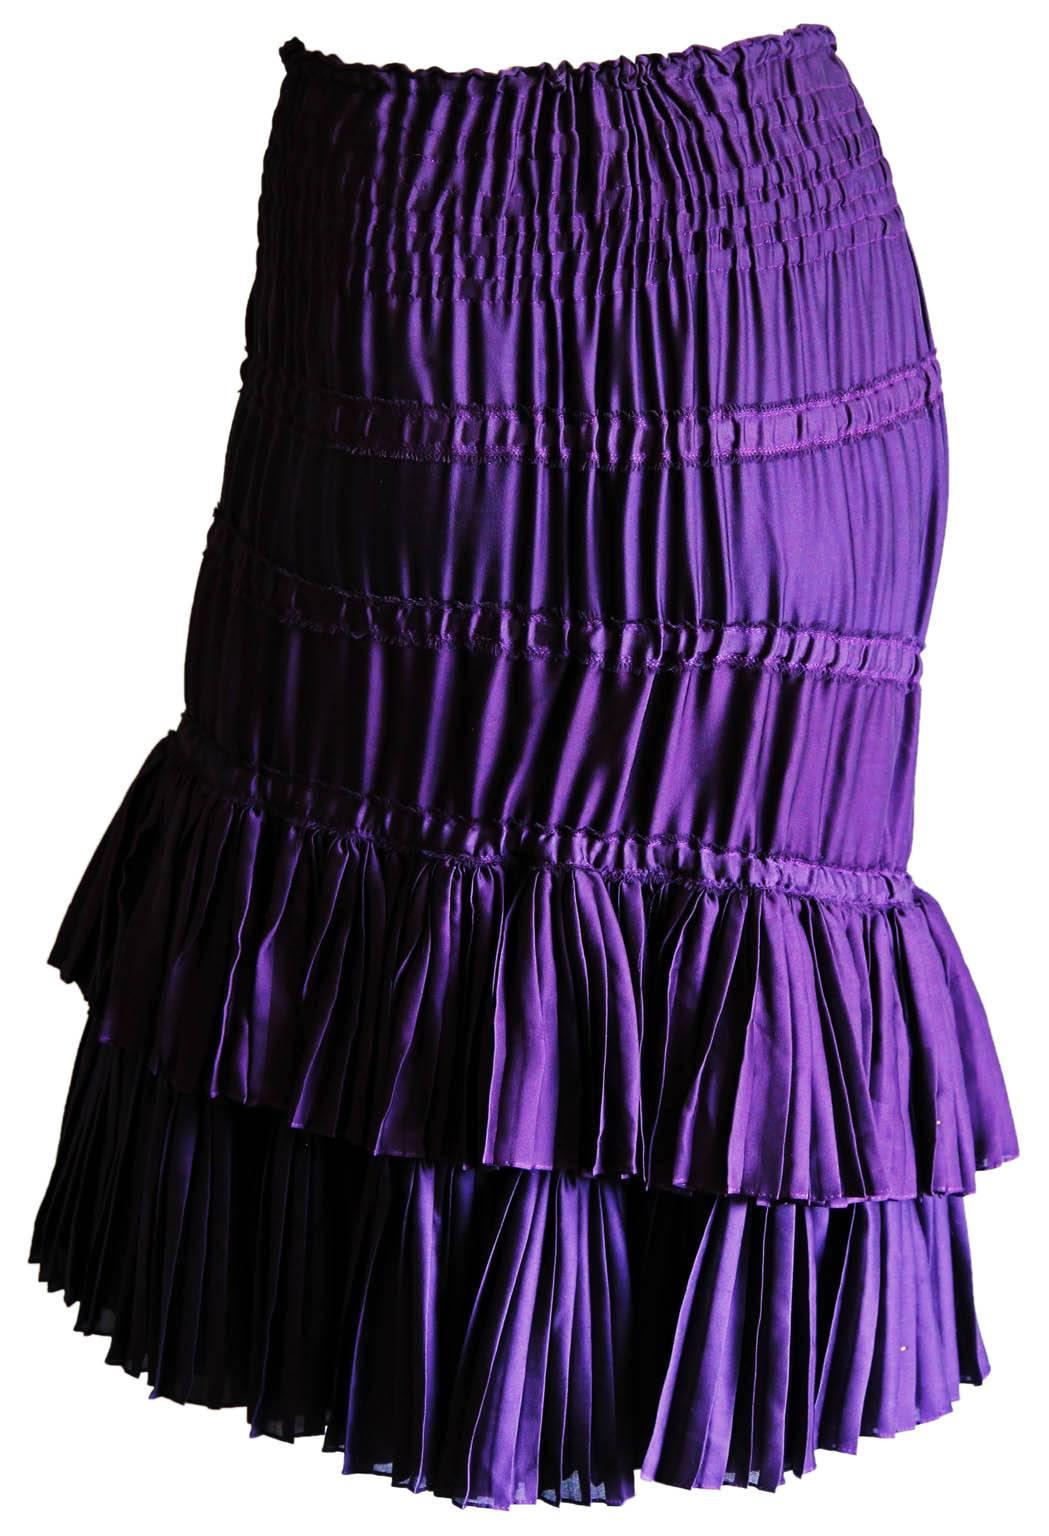 Tom Ford's Amazing Iconic YSL Rive Gauche Fall Winter 2001 Deep Purple Silk  Multi-Layered Gypsy Boho Runway Skirt!

Who could ever forget Tom Ford's fall/winter 2001 show for Yves Saint Laurent Rive Gauche & those heavenly layered 